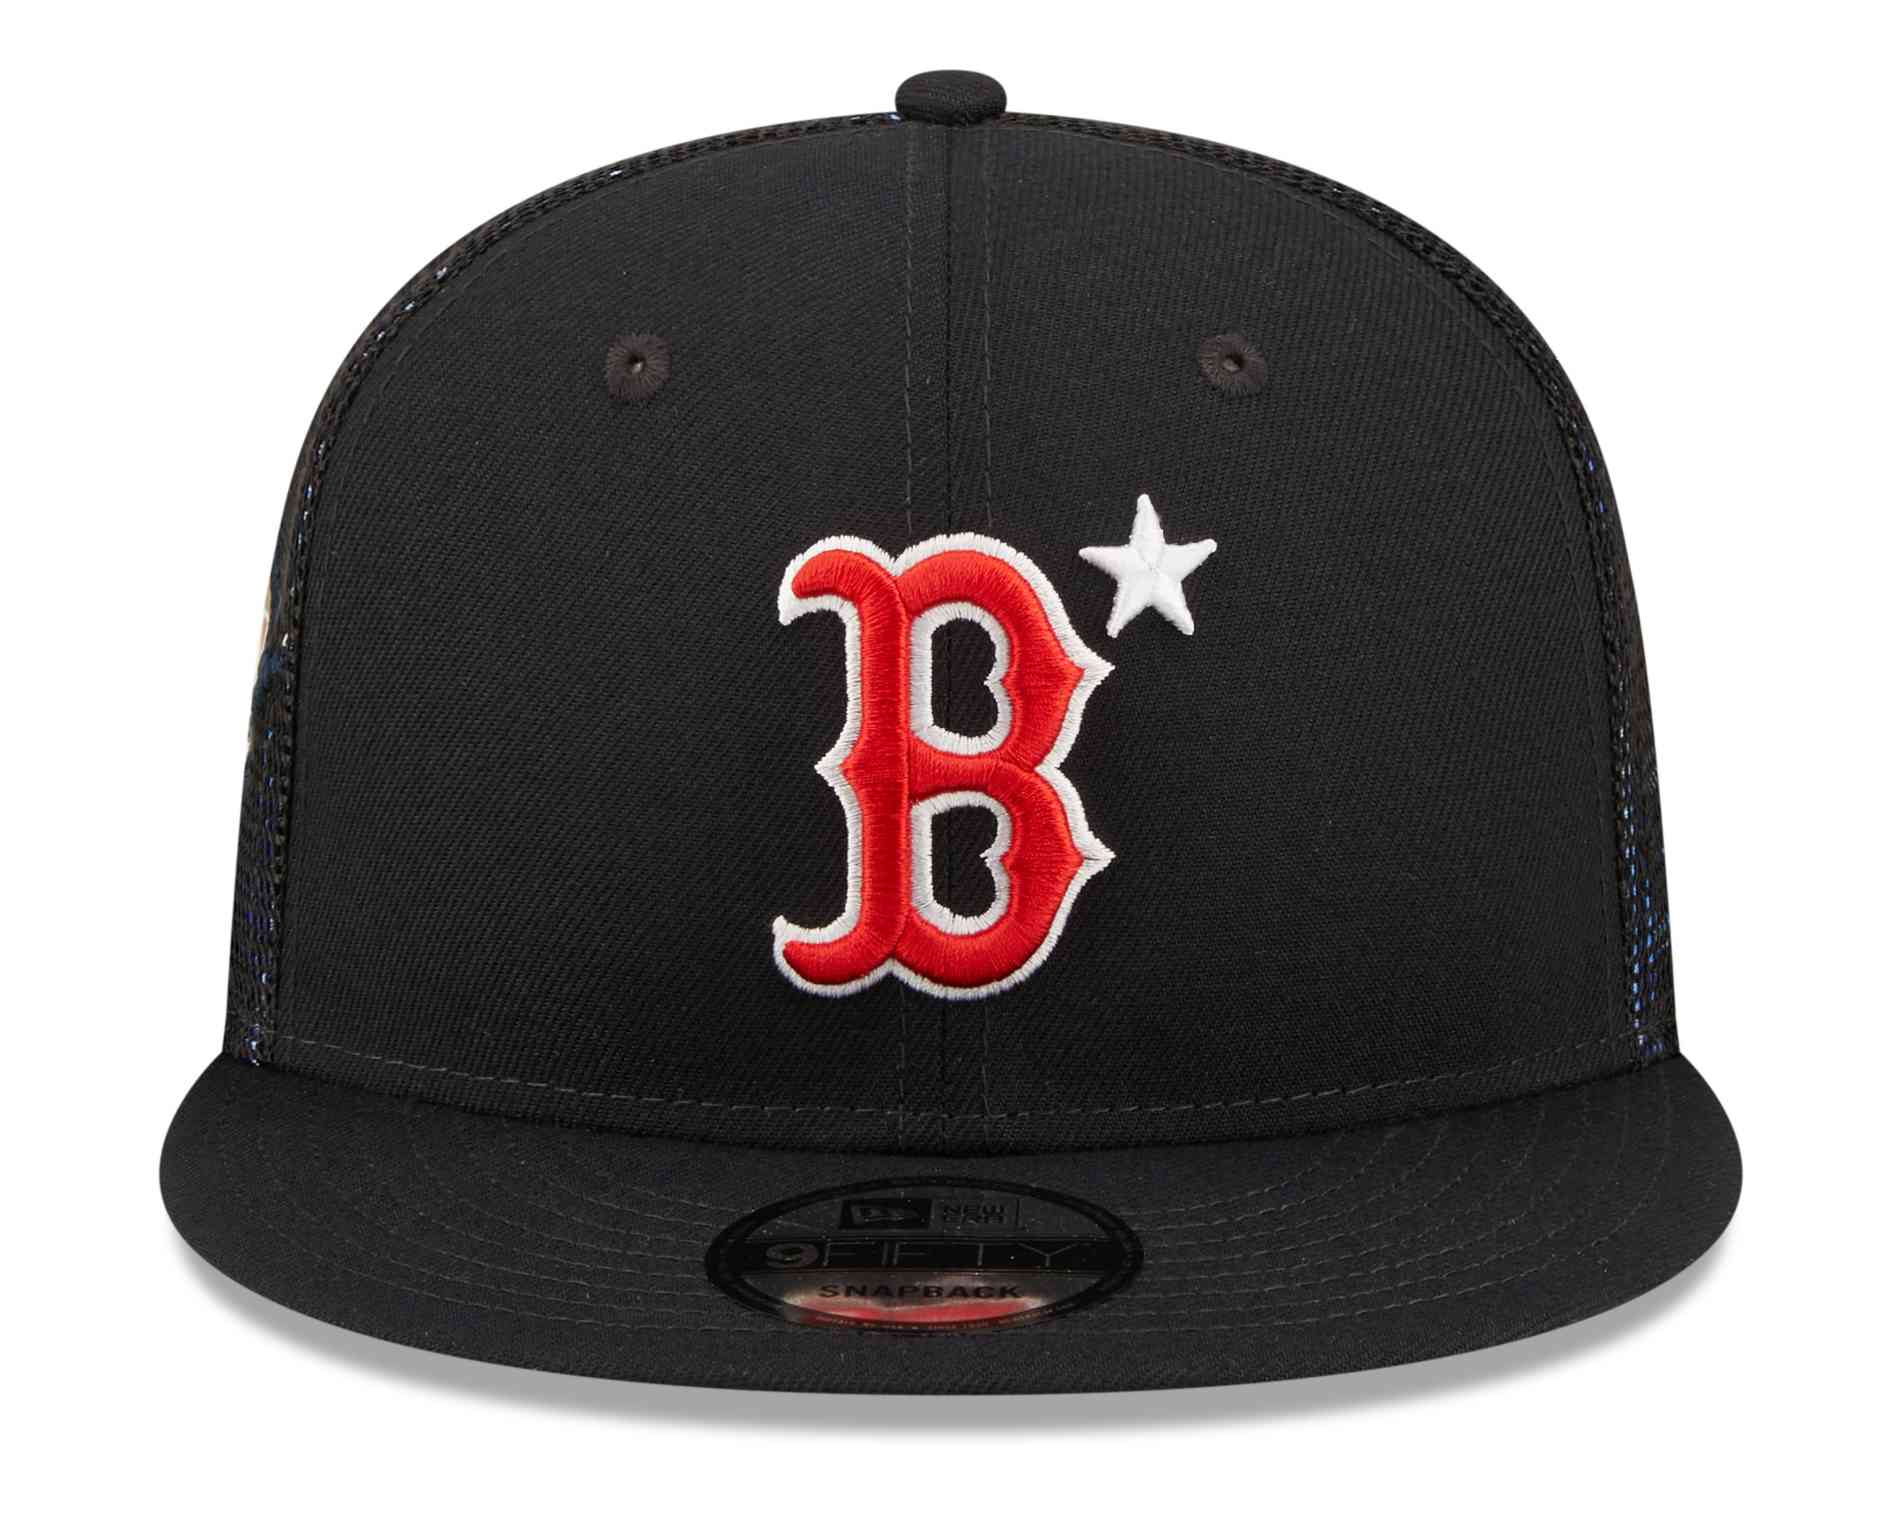 New Era - MLB Boston Red Sox All Star Game Patch 9Fifty